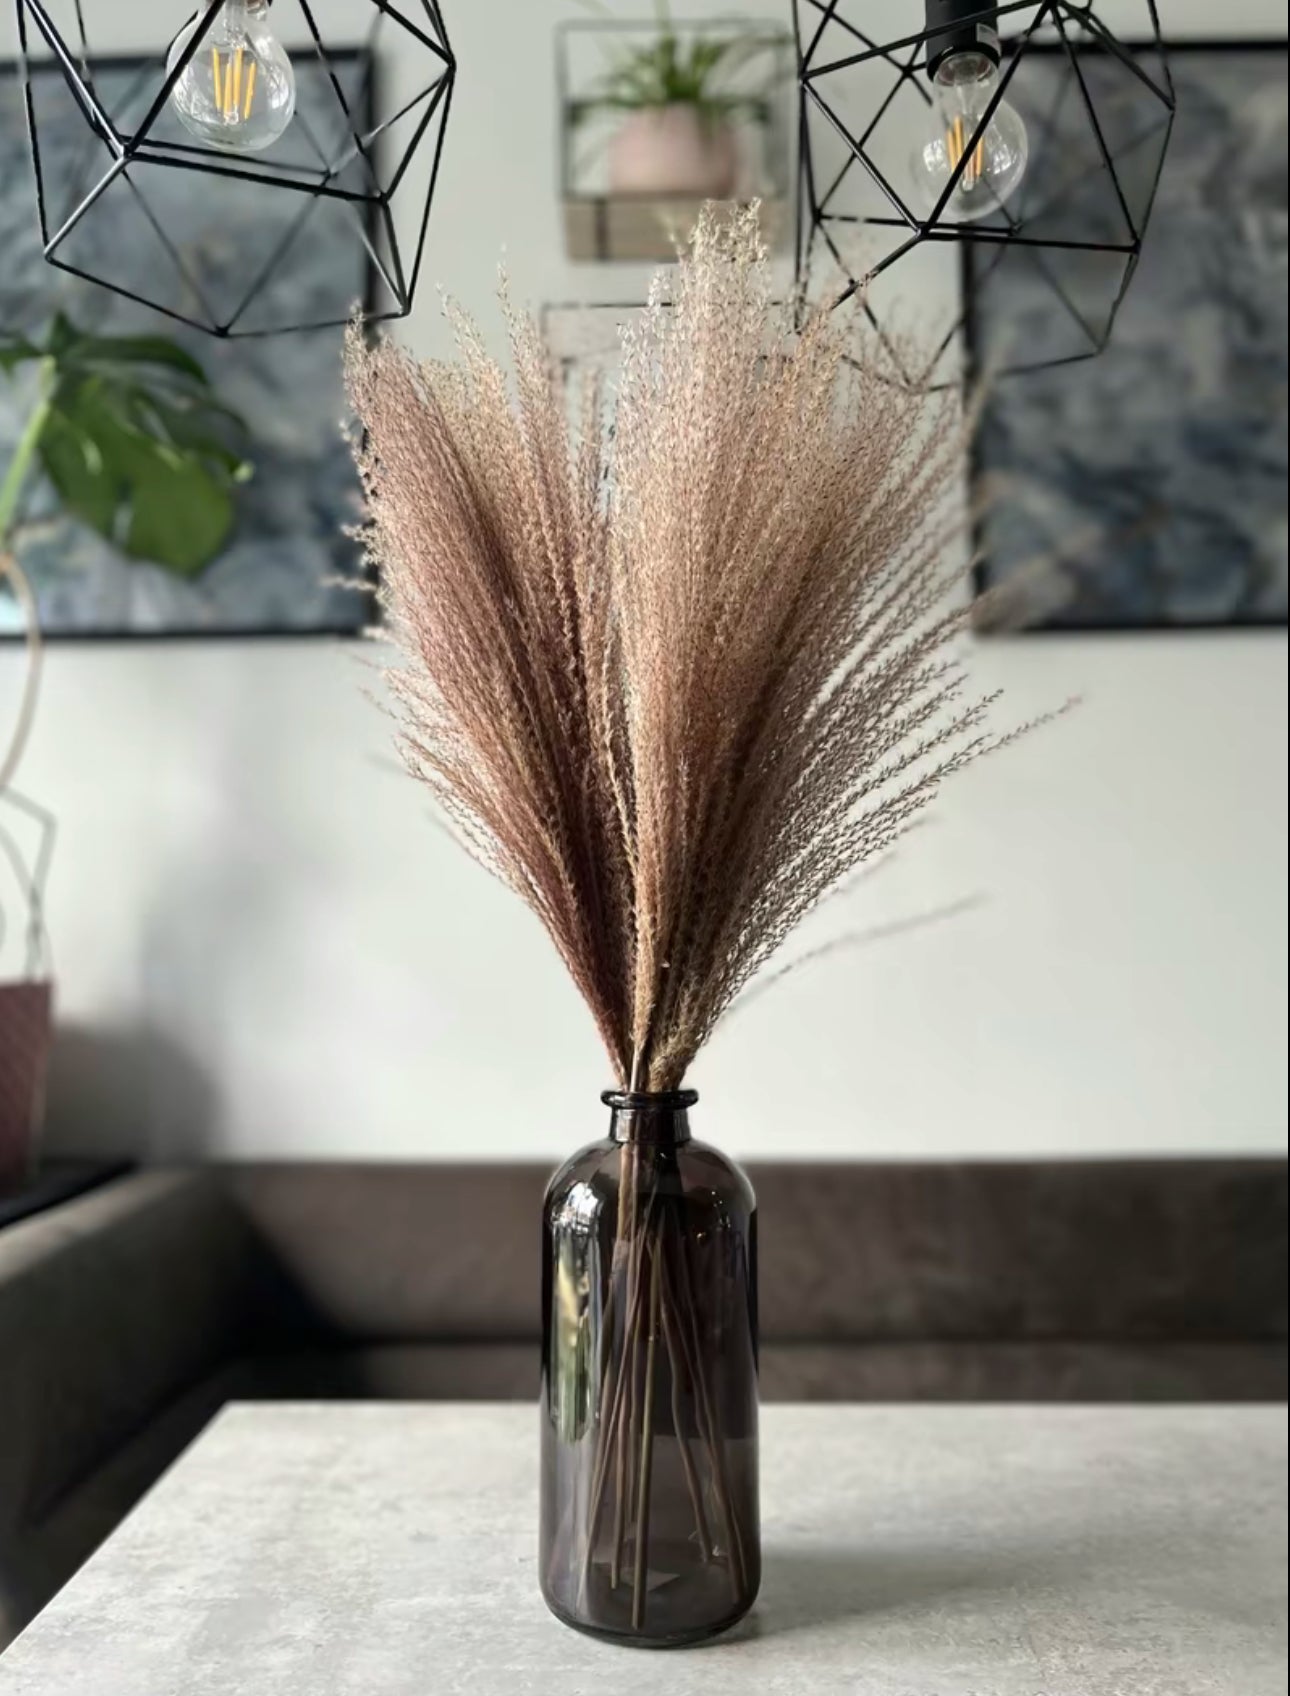 Fluffy Dried Stipa - dried flowers, natural dried flowers